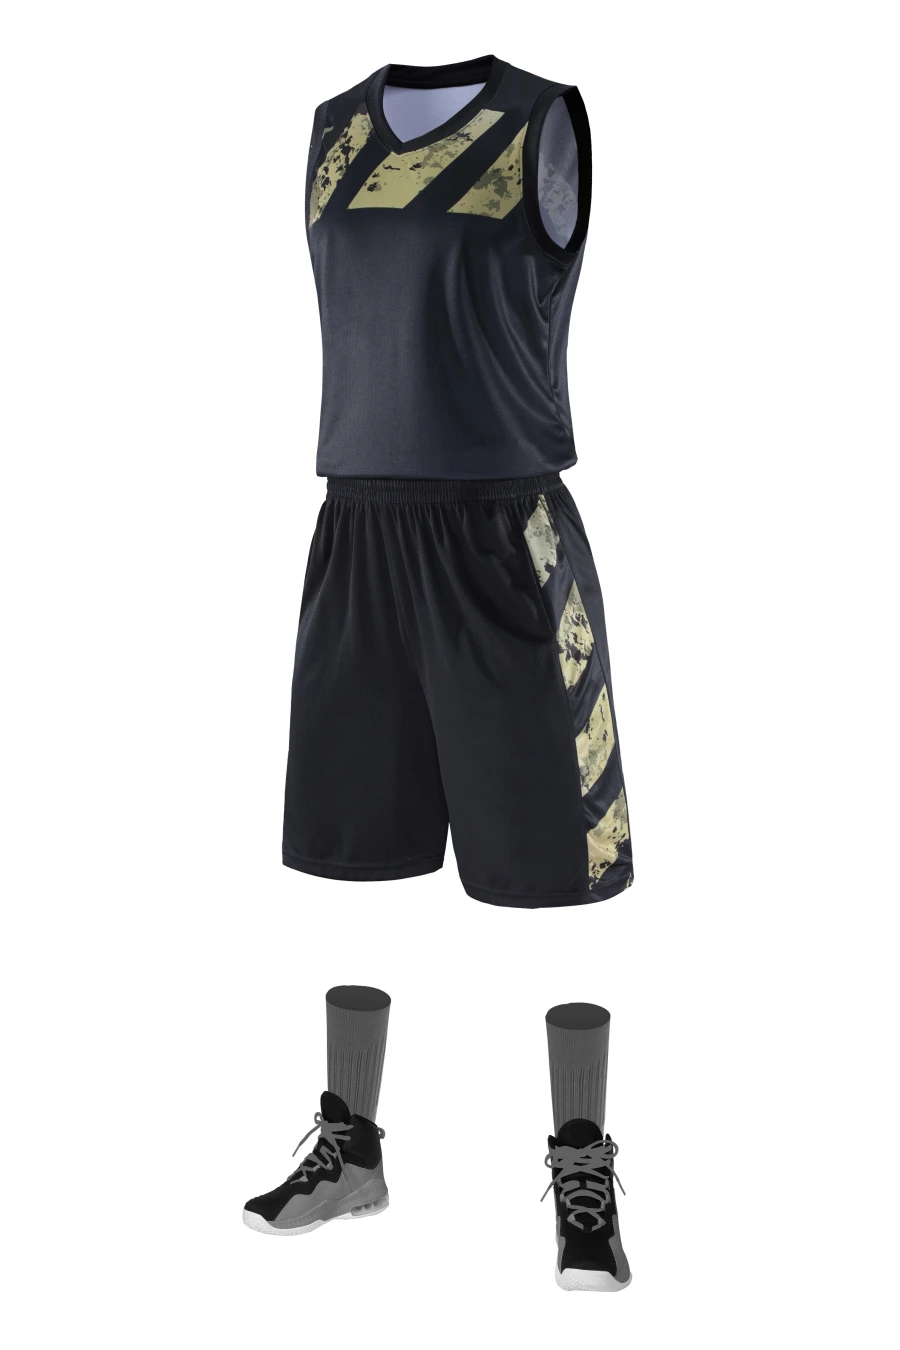 Gold Black Personalized Basketball Jerseys and Shorts | YoungSpeeds Mens